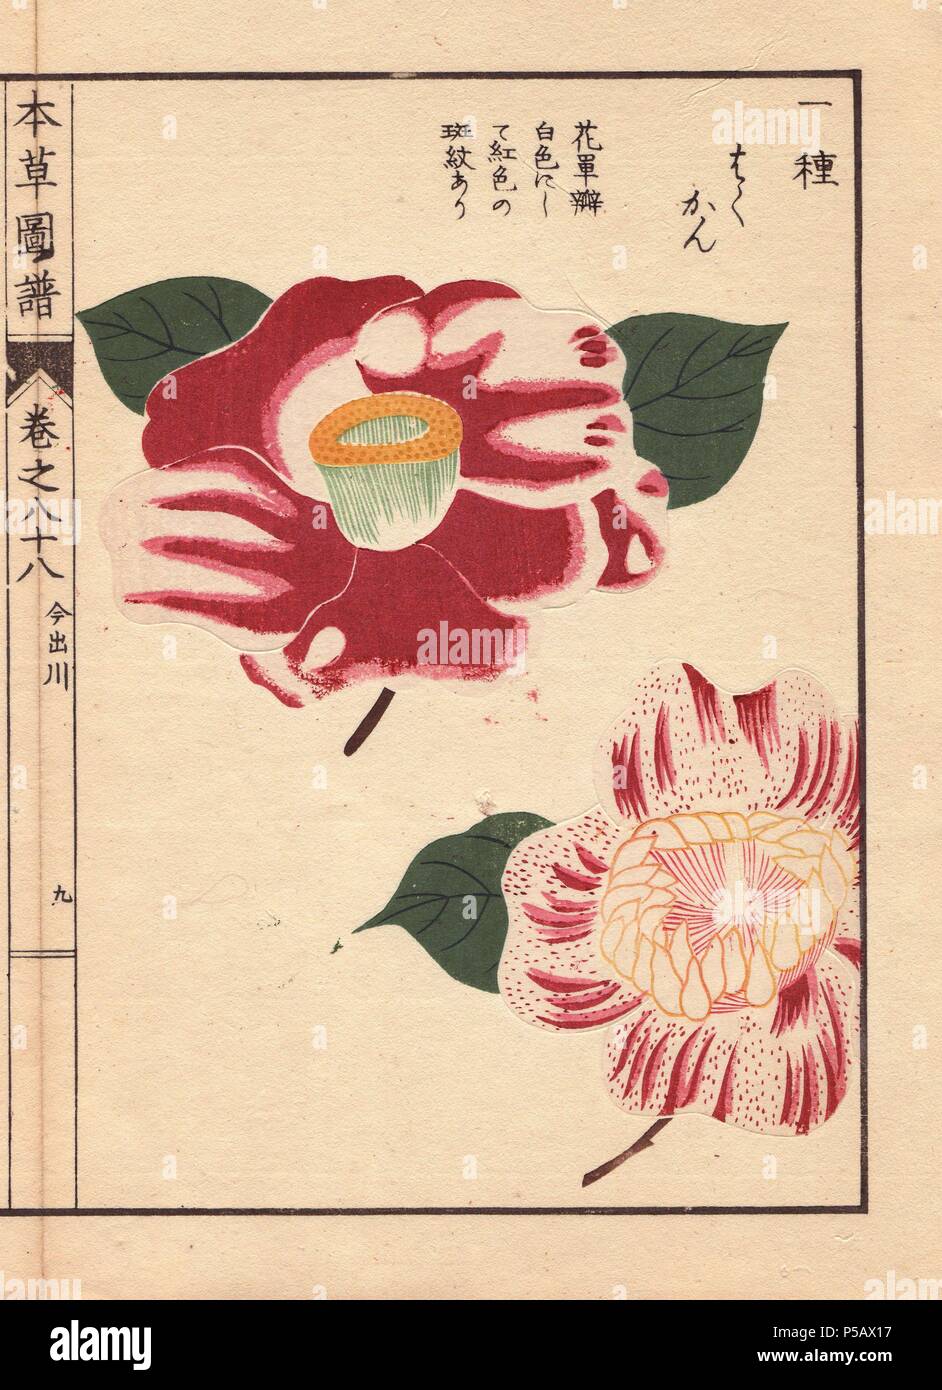 Scarlet and white camellias 'Imadegawa' and 'Hakukan'. . Thea japonica Nois flore semipleno forma. . Color-printed woodblock engraving by Iwasaki from 'Honzo Zufu' (An Illustrated Guide to Medicinal Plants) (1884).. . Kan'en Tsunemasa Iwasaki (1786-1842) was a Japanese botanist, entomologist and zoologist. He was one of the first Japanese botanists to incorporate western knowledge into his studies - since the 8th century, Japanese botany had been based on Chinese herbals. Iwasaki's Honzo Zufu adopts the plant classification of Li Shi-zhen's Pents'ao kang mu published in China in 1596, but also Stock Photo